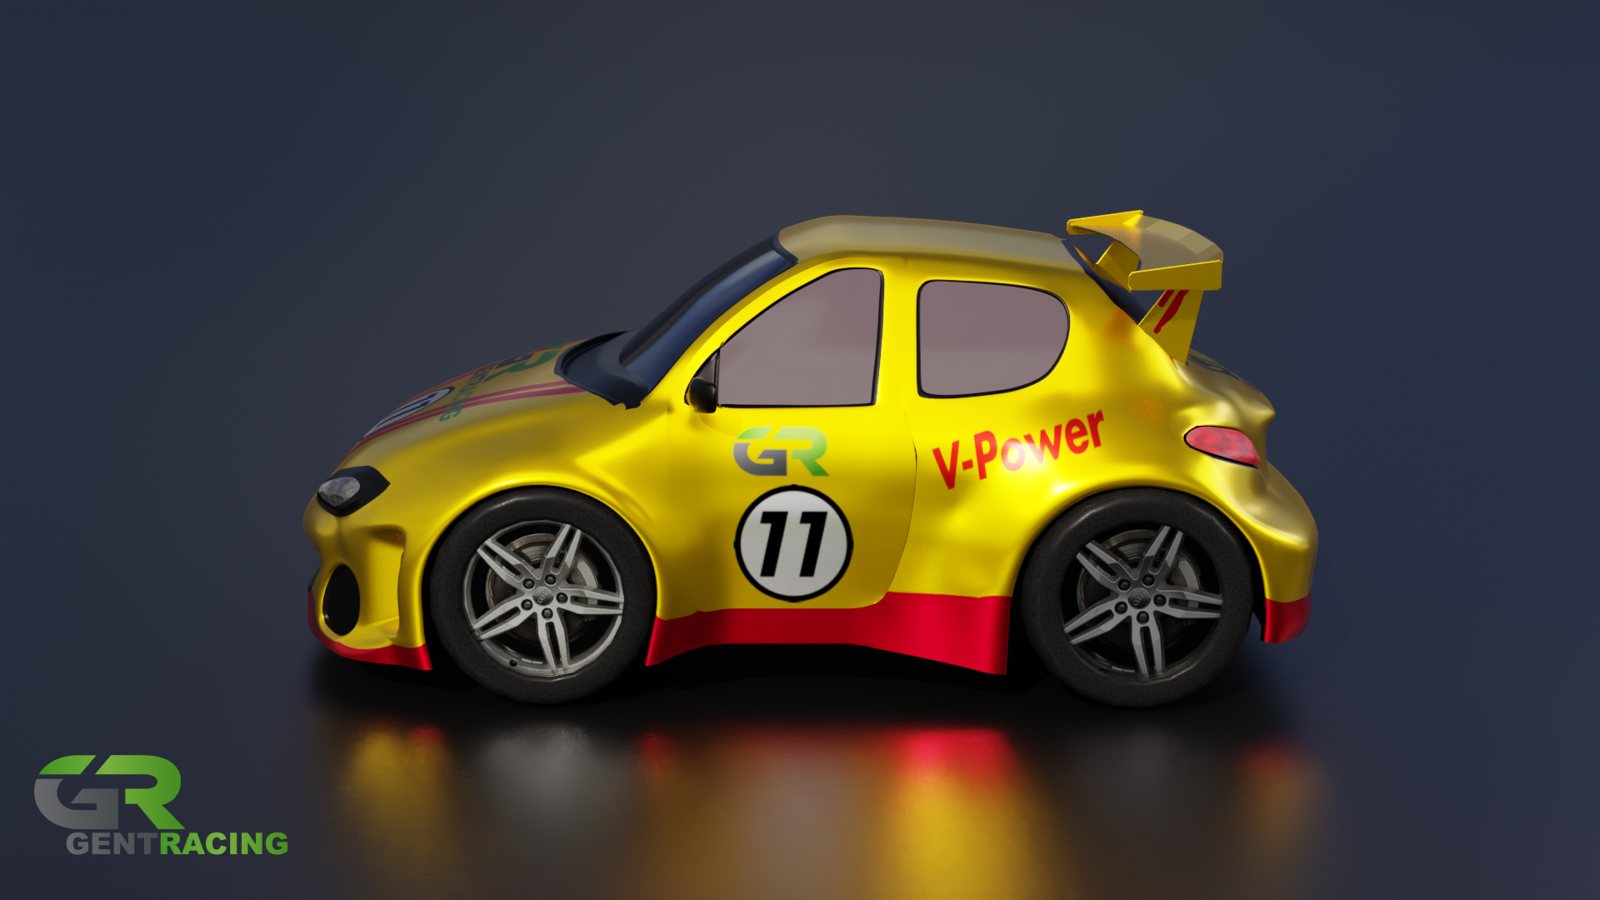 Low Poly cars for Gent-racing